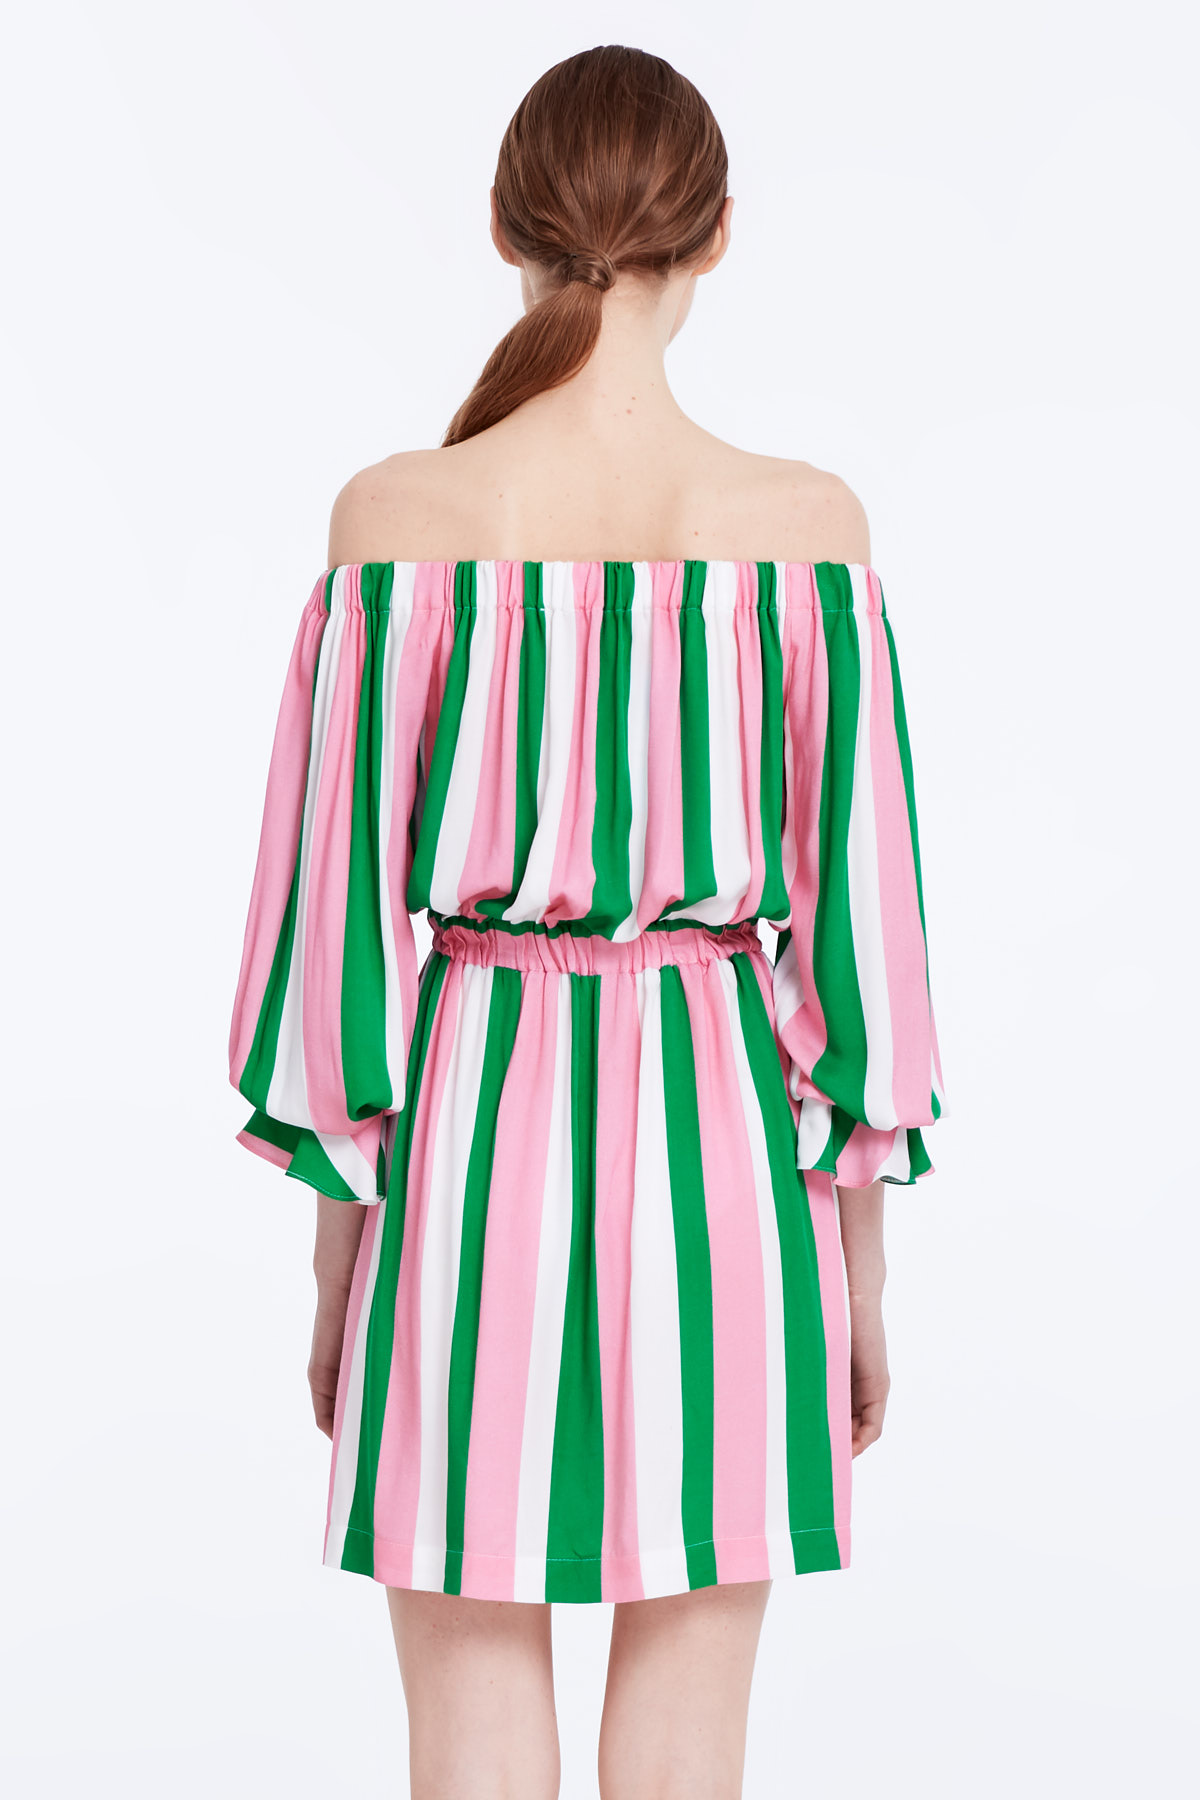 Off-shoulder dress with white, green and pink stripes, photo 5